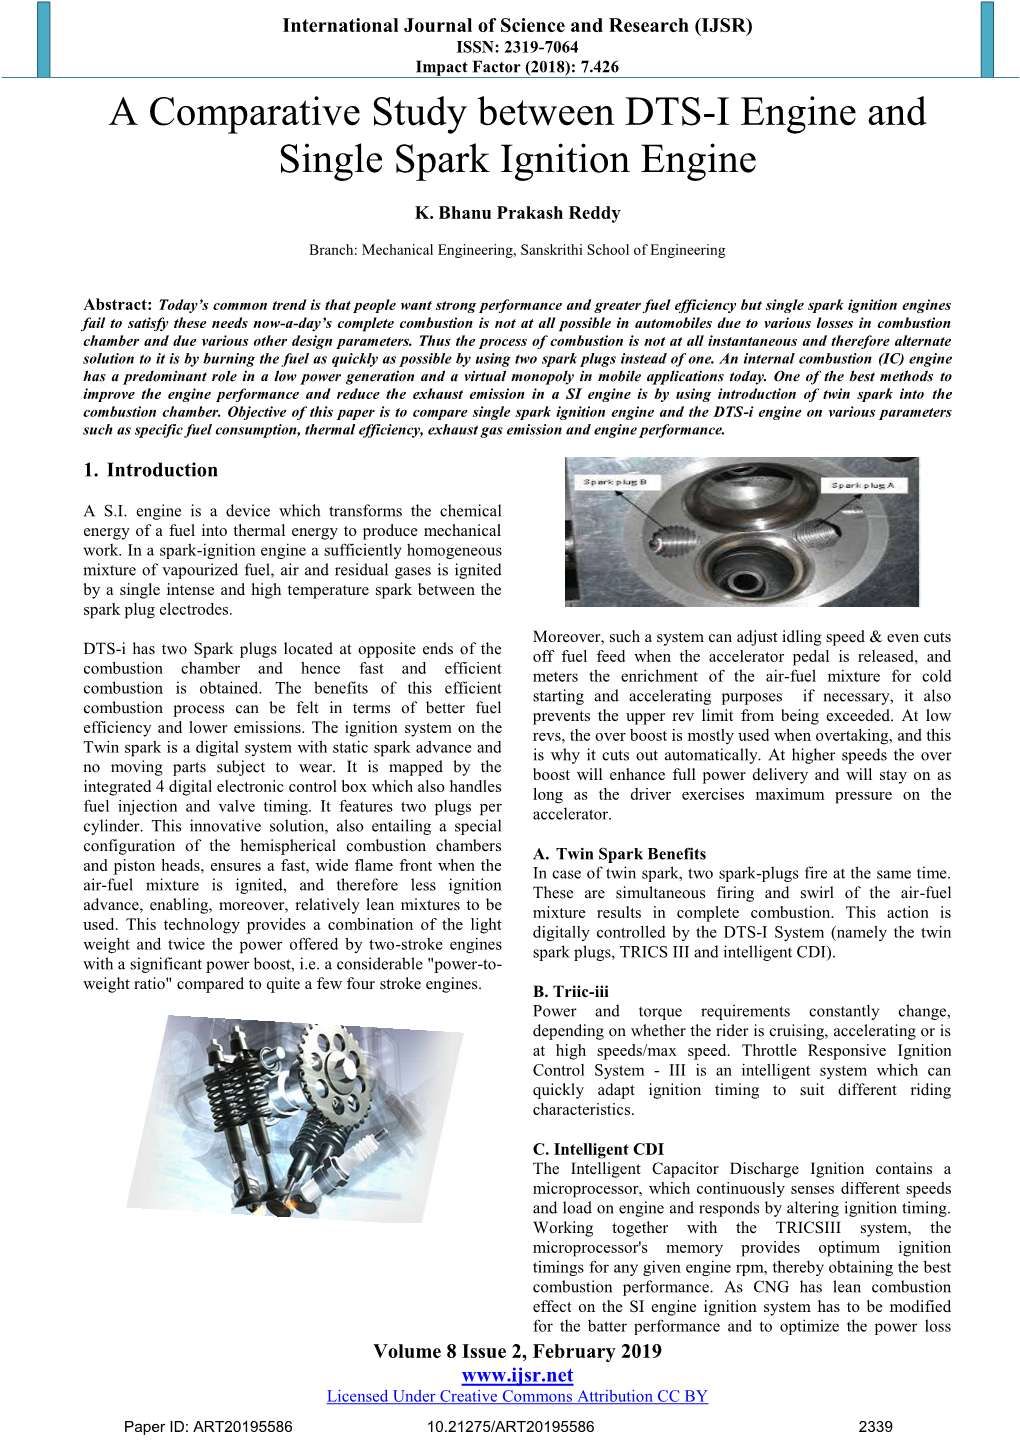 A Comparative Study Between DTS-I Engine and Single Spark Ignition Engine